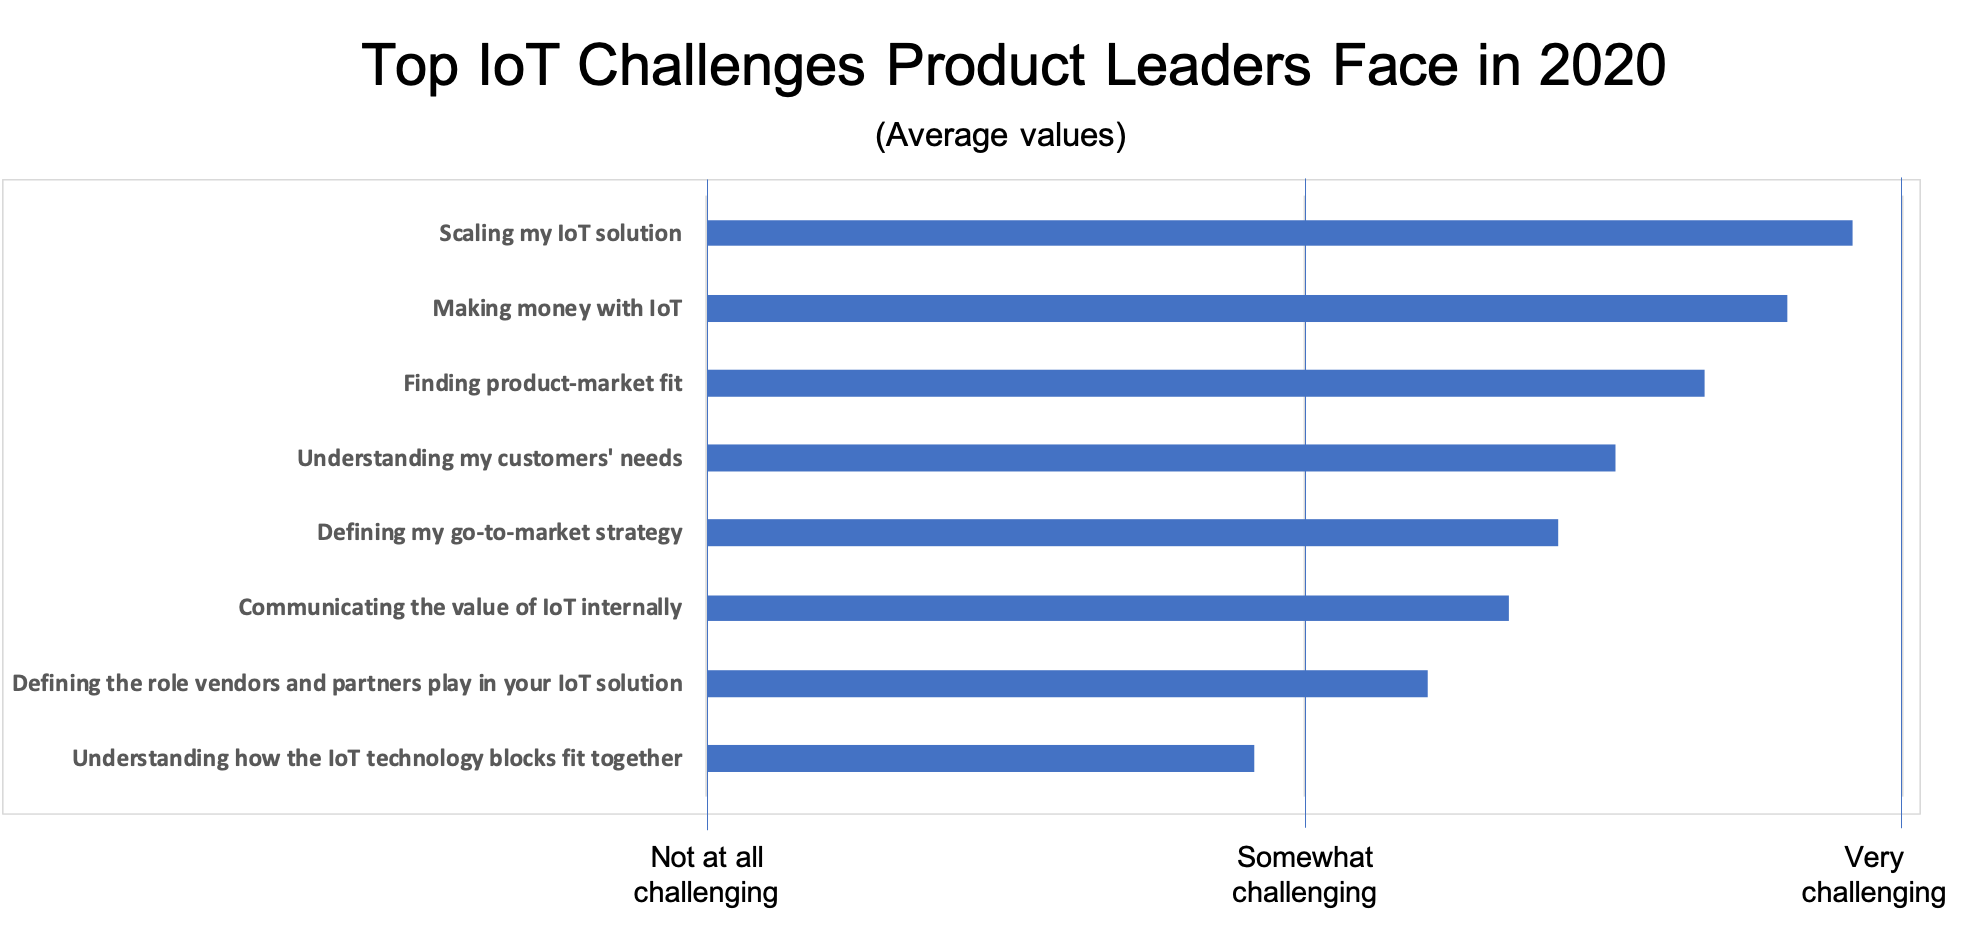 IoT Challenges Product Leaders face